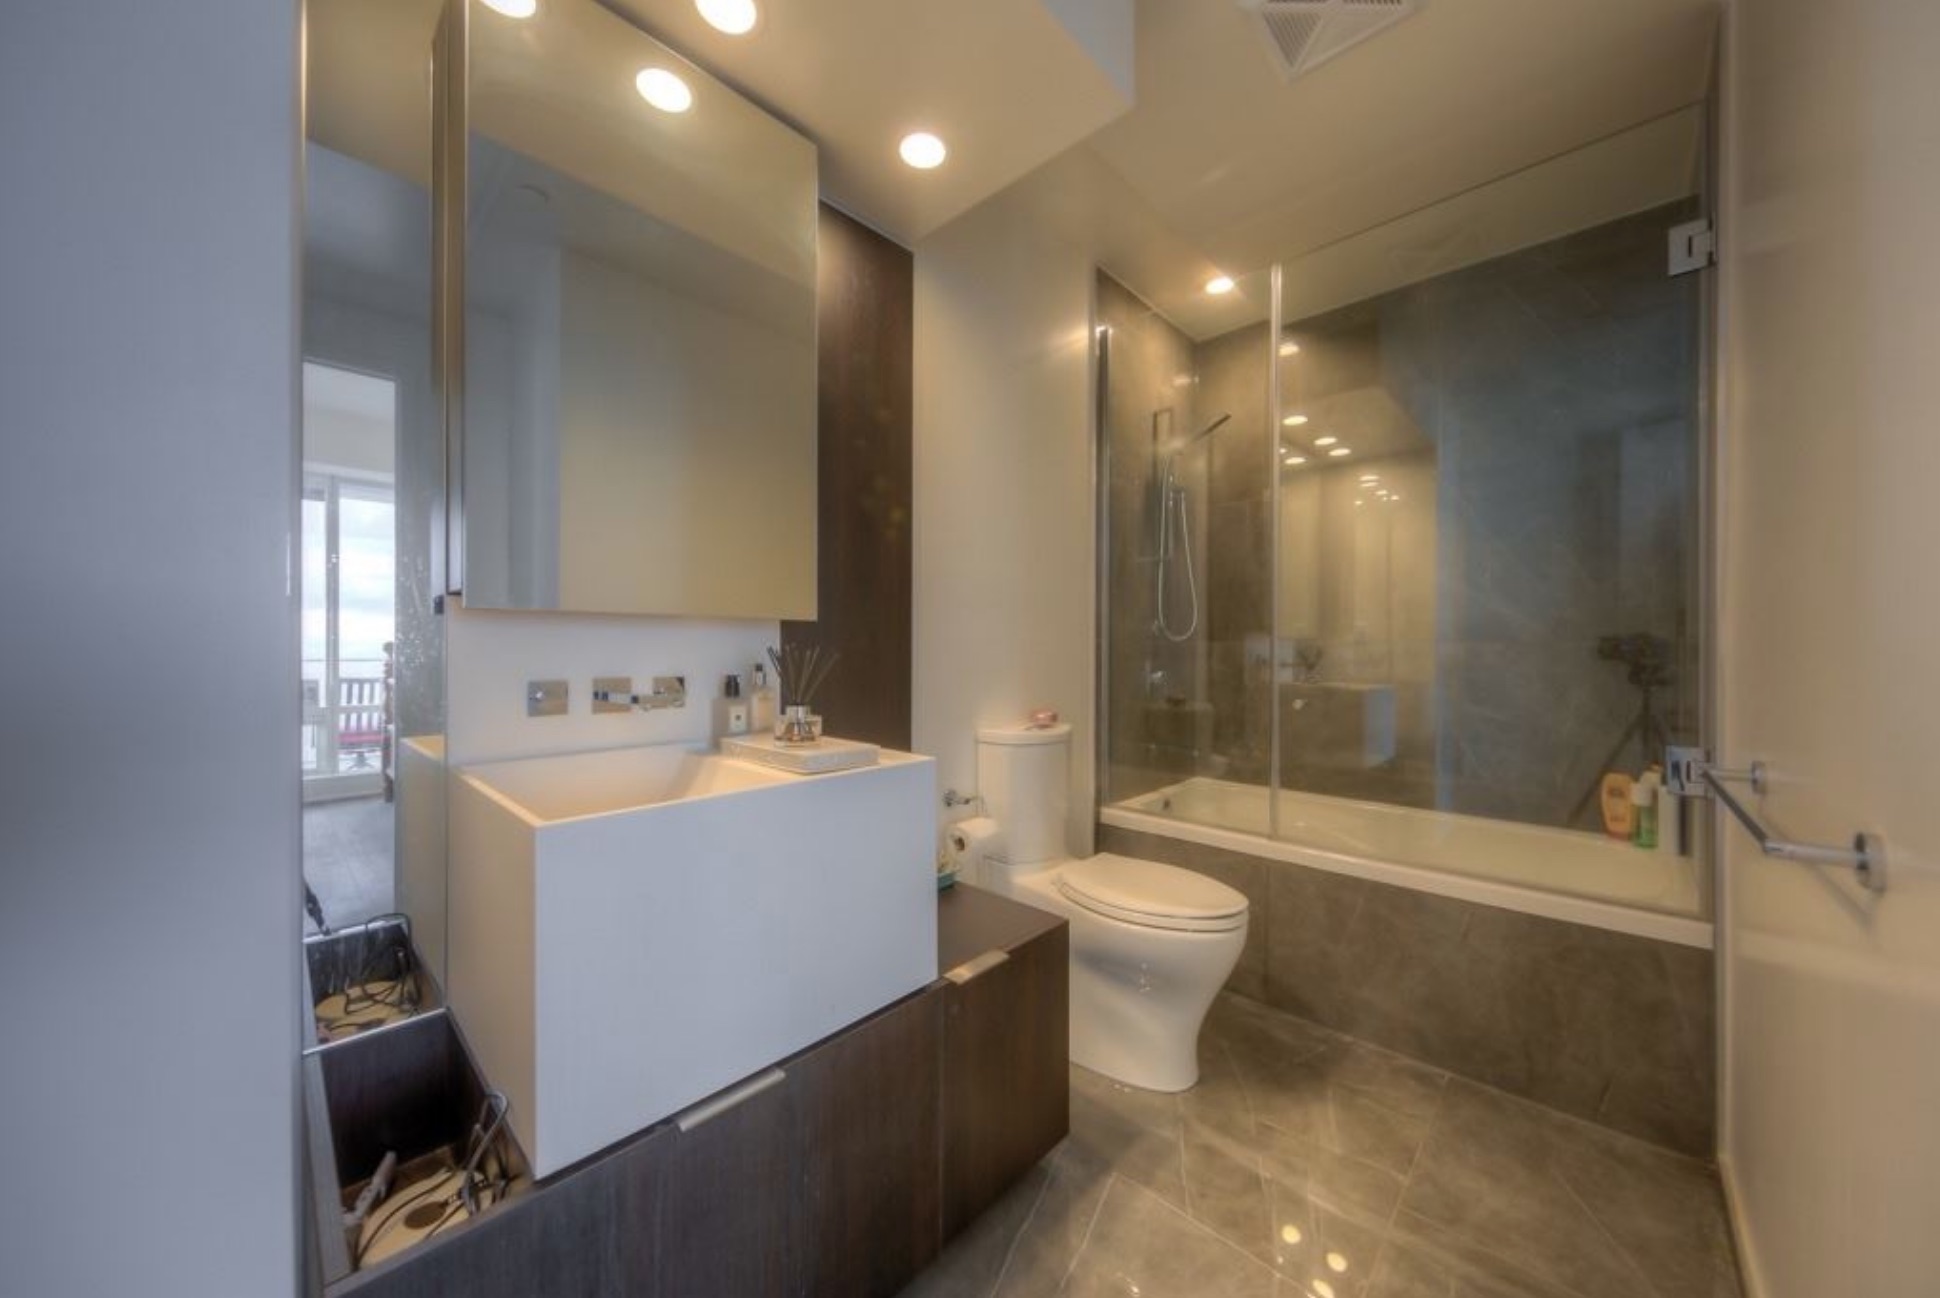 The master bathroom with a glass-enclosed shower-tub combo